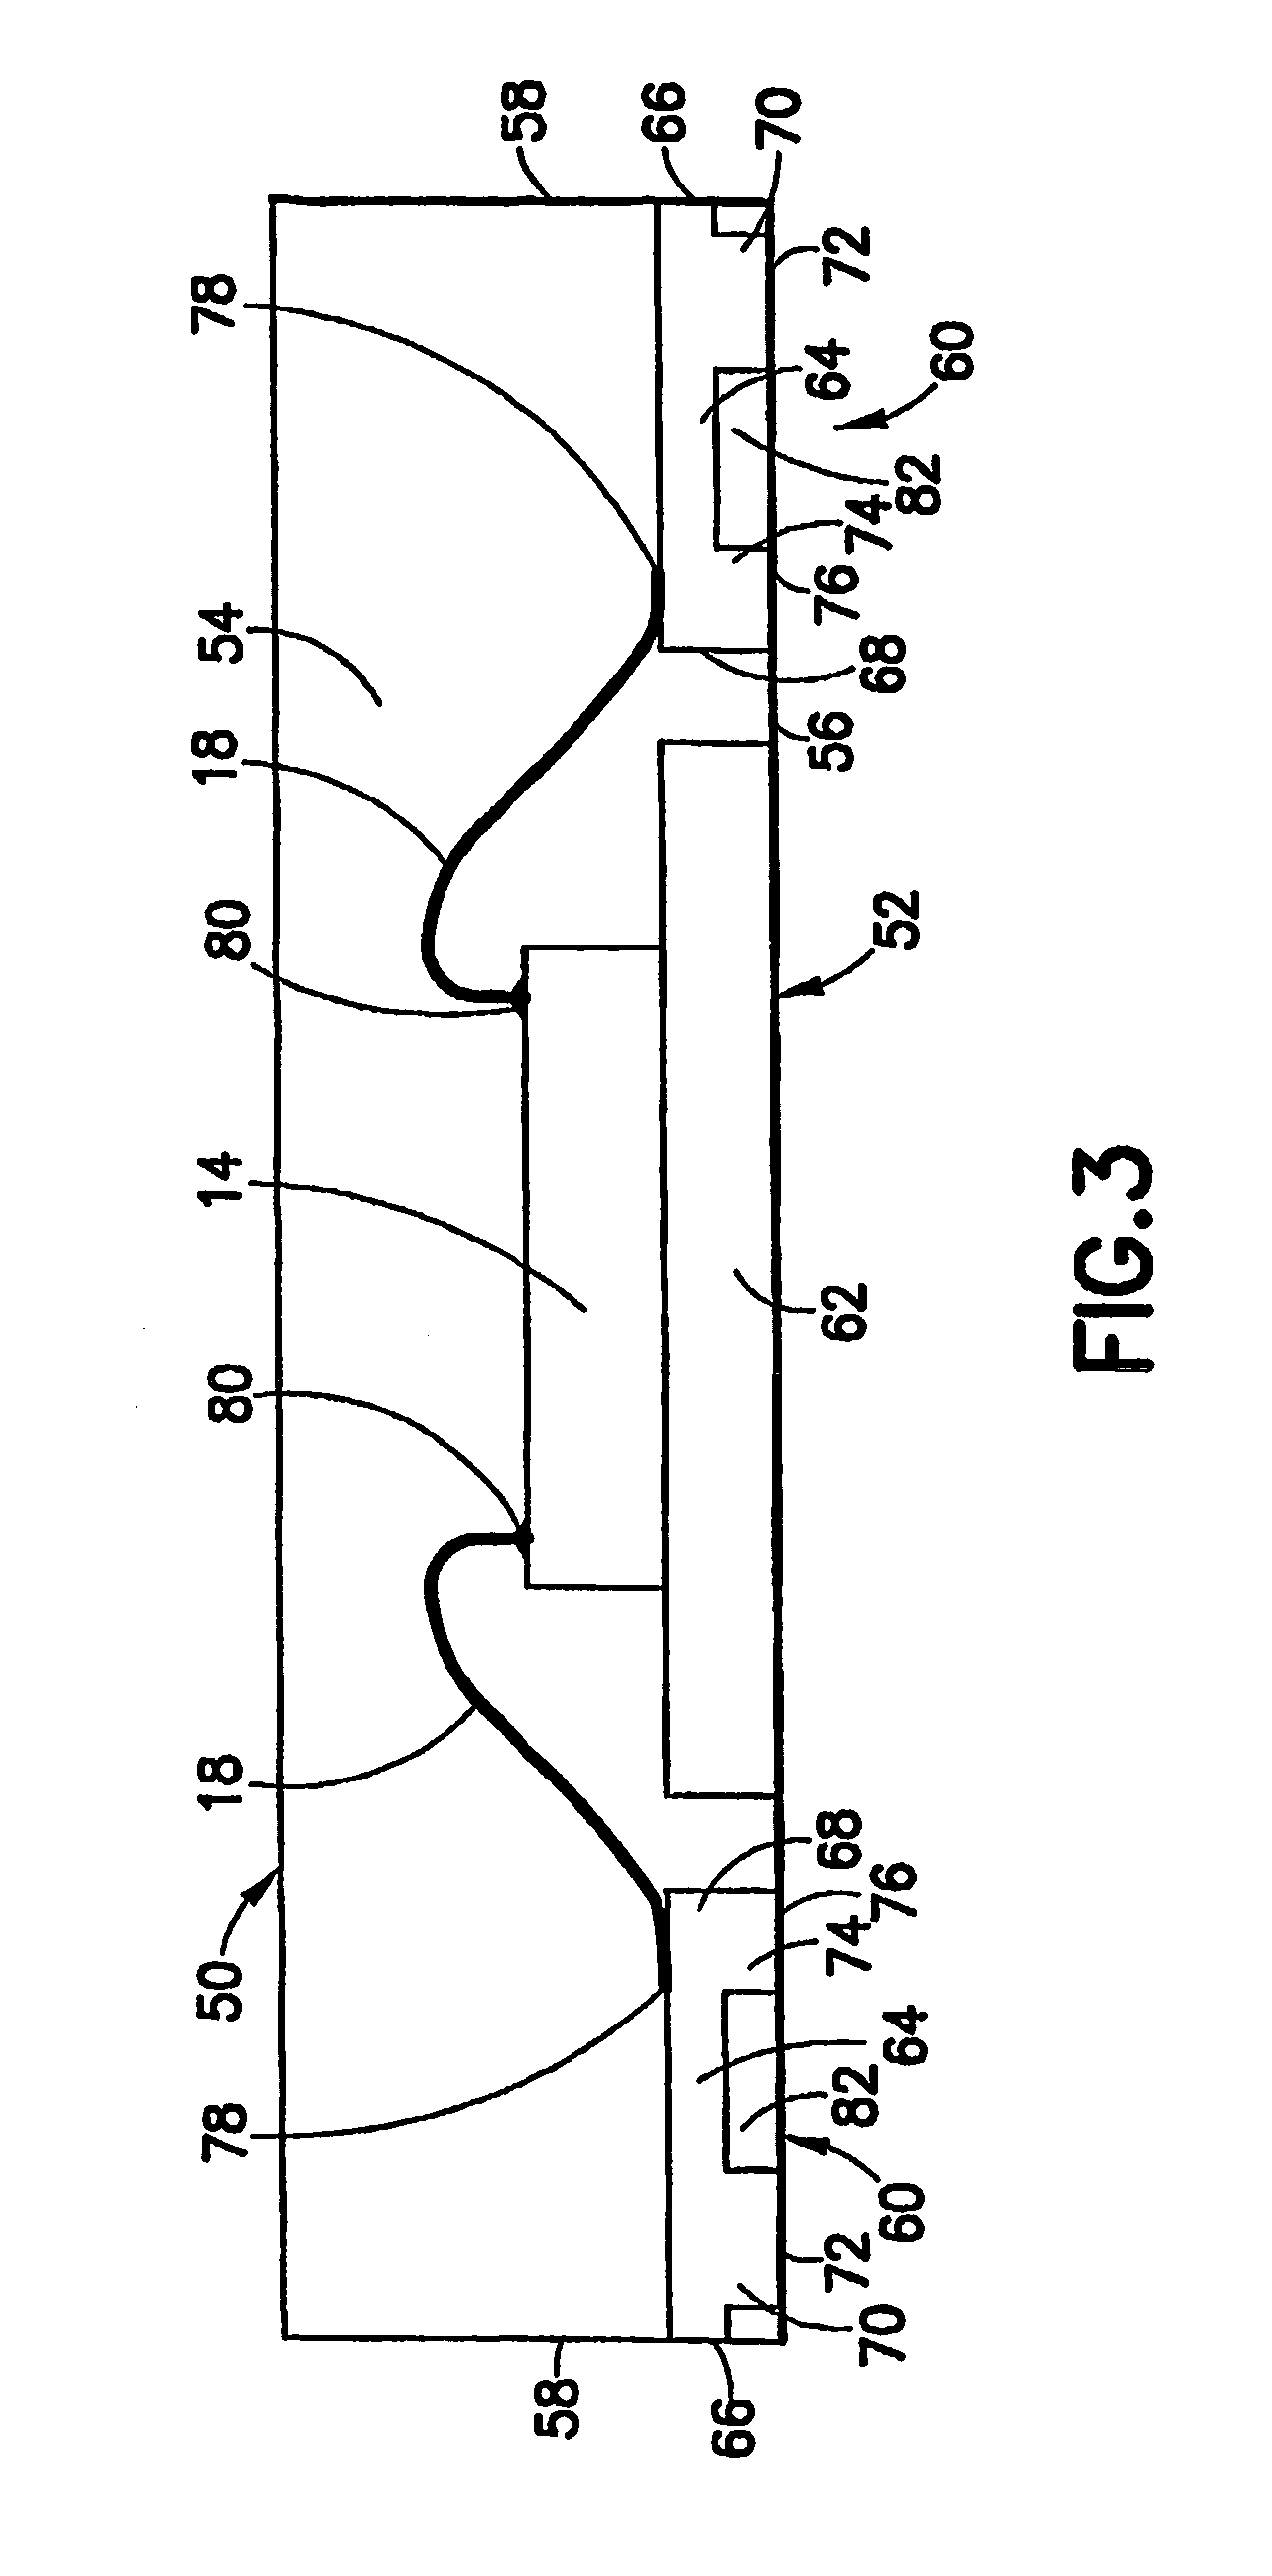 Semiconductor device package and method for manufacturing same